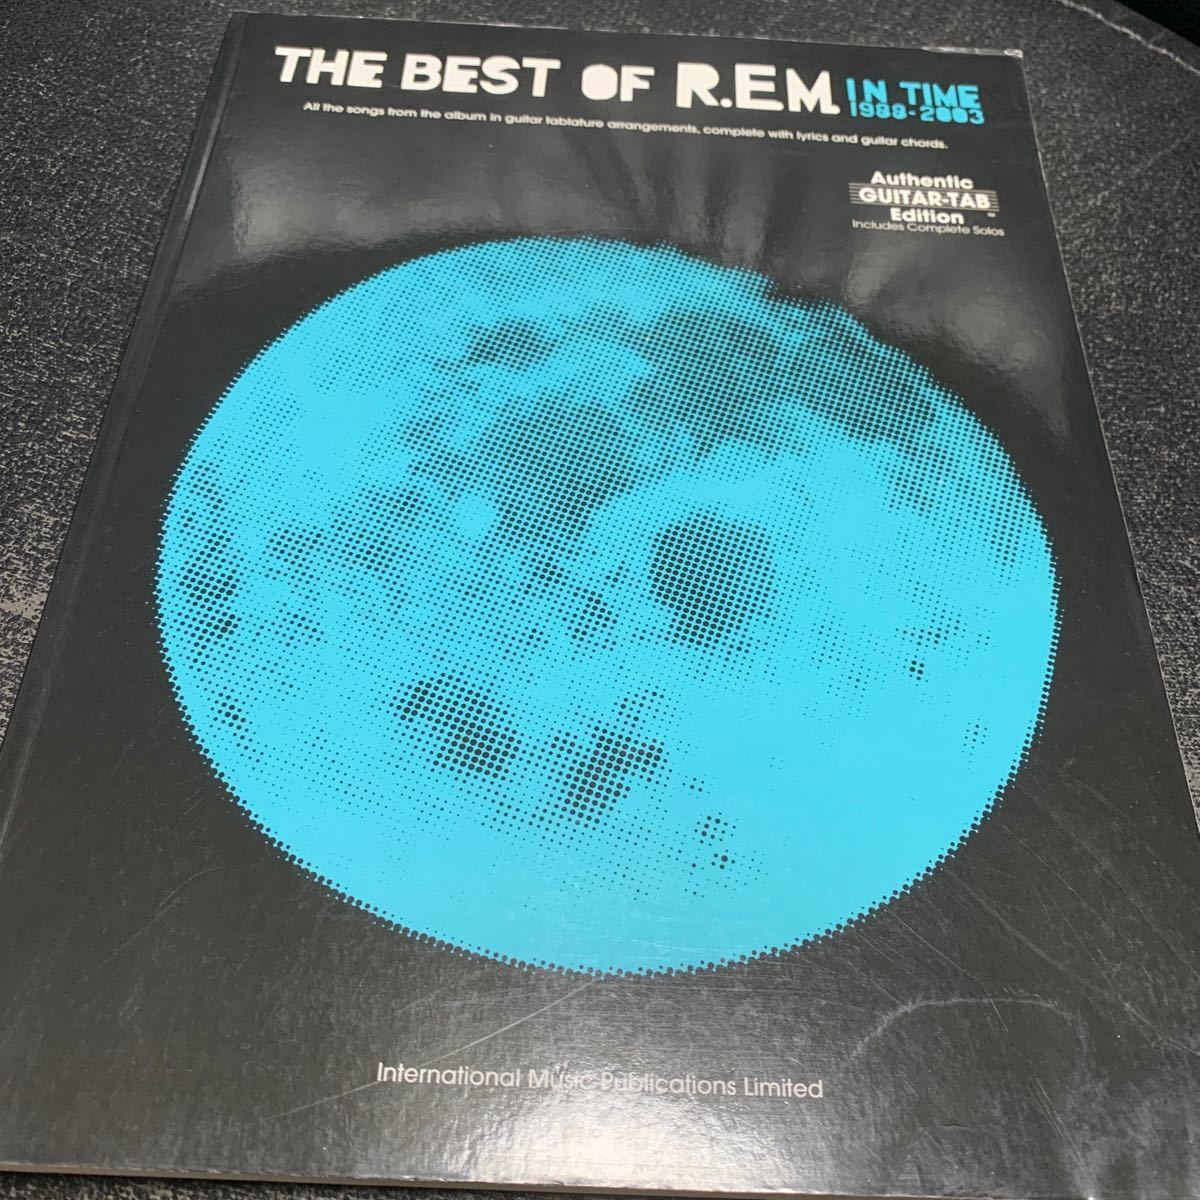 THE BEST OF R.E.M. IN TIME 1988-2003 ベスト　ギタースコア　TAB譜　ピーター・バック_画像1